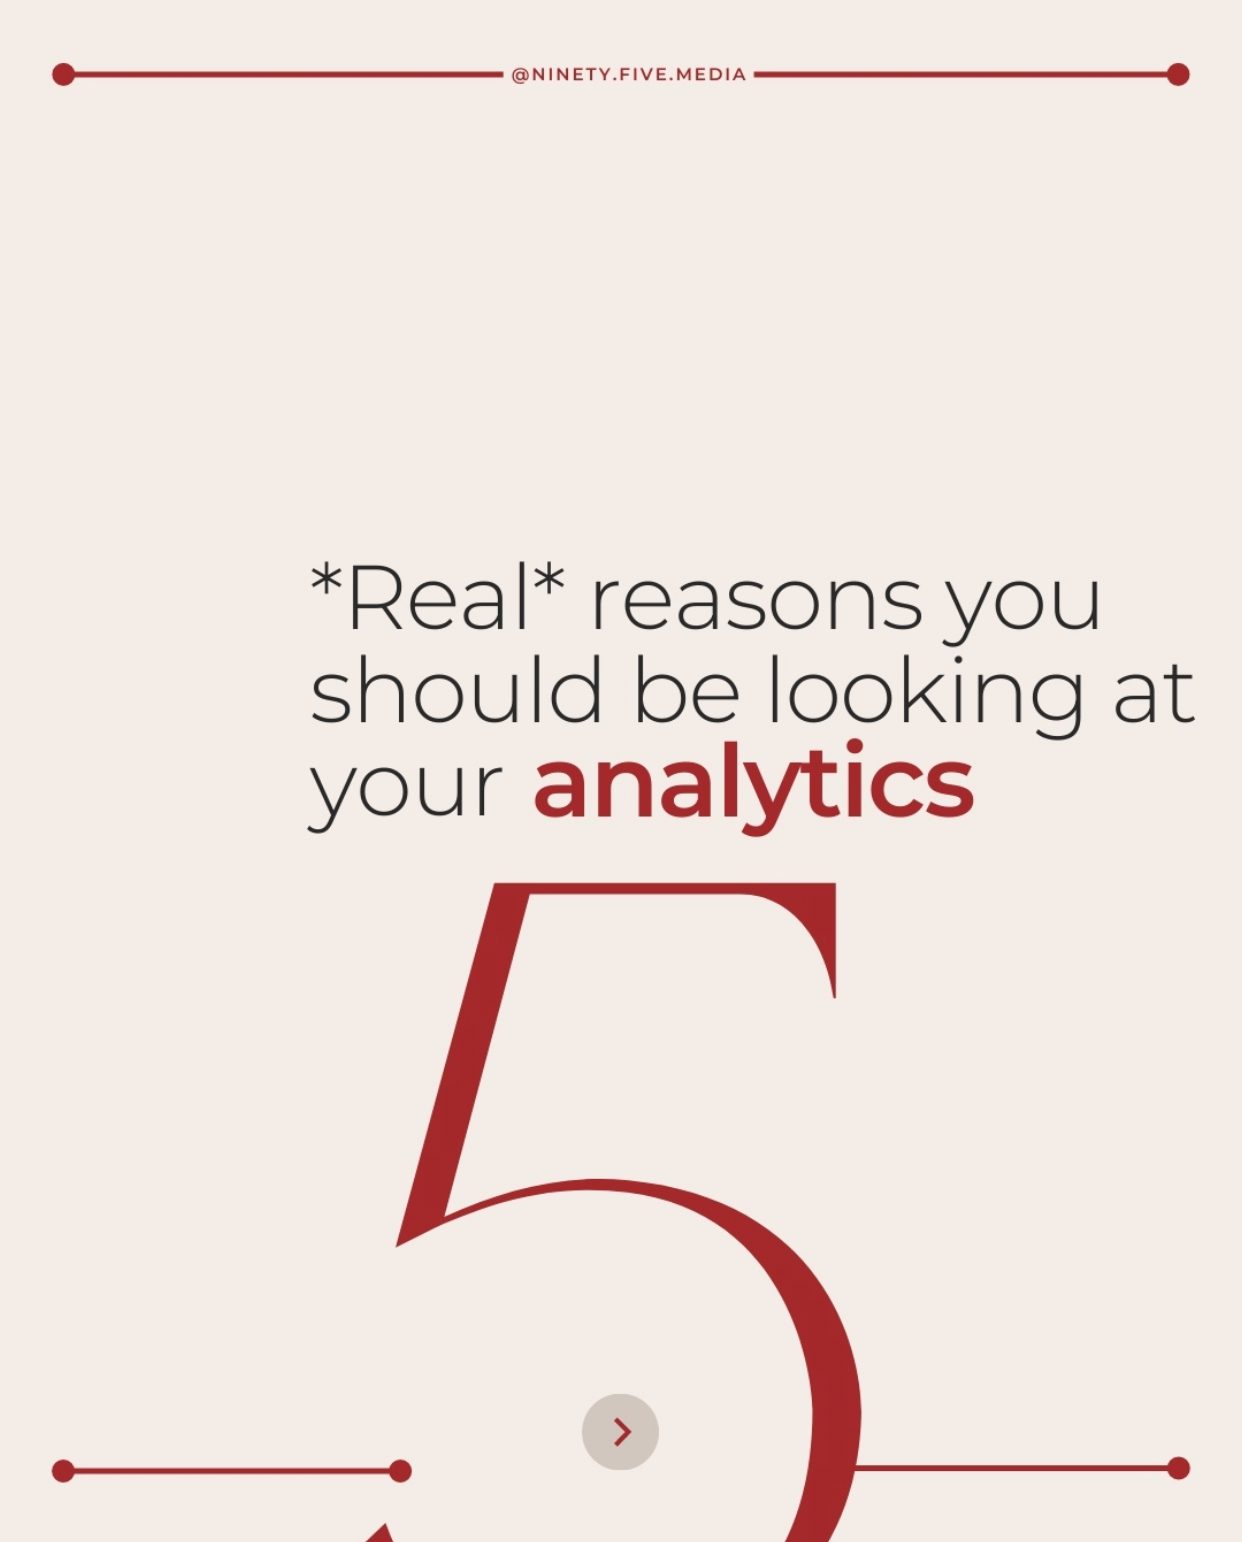 5 real reasons you should be looking at your analytics.